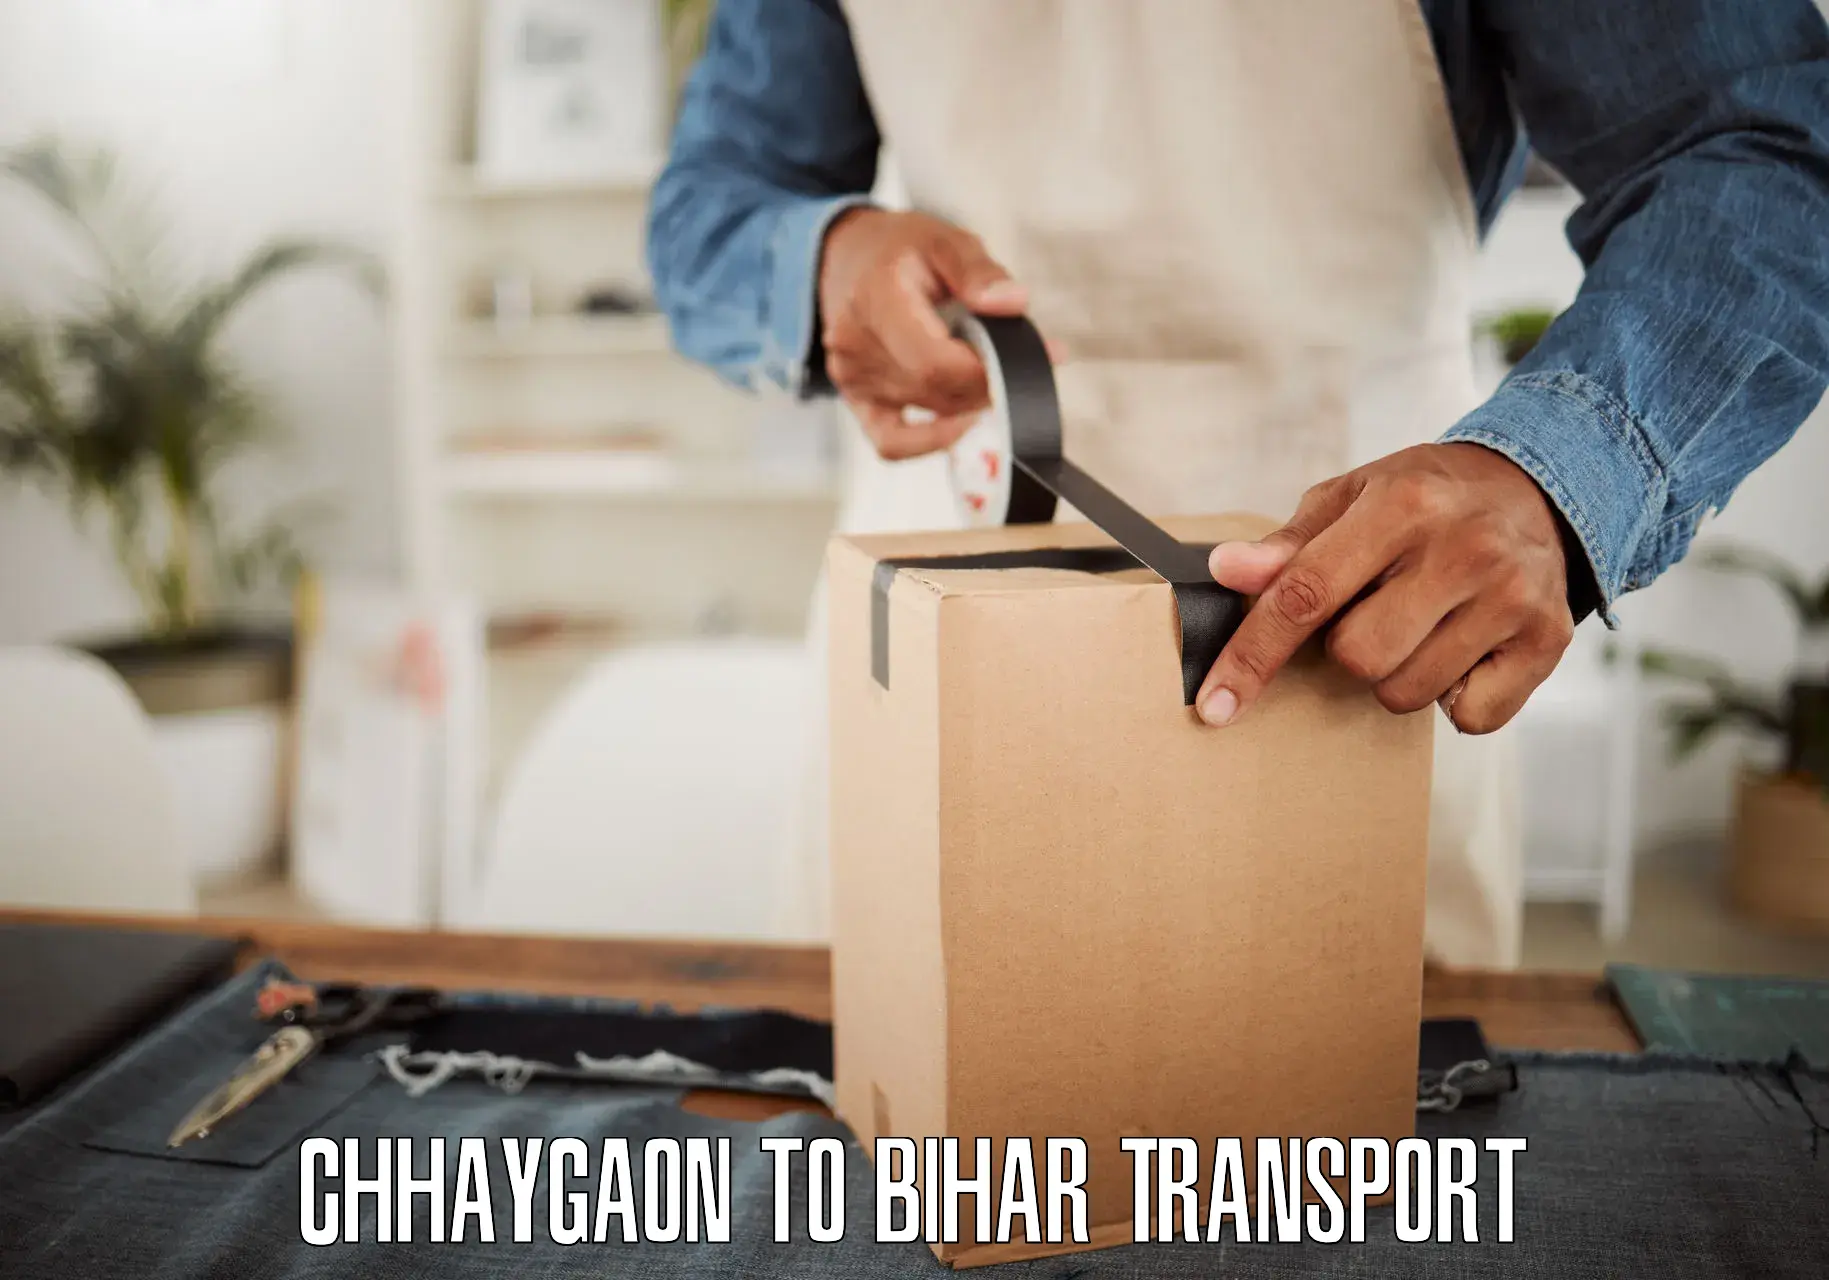 Cargo transport services Chhaygaon to Bettiah